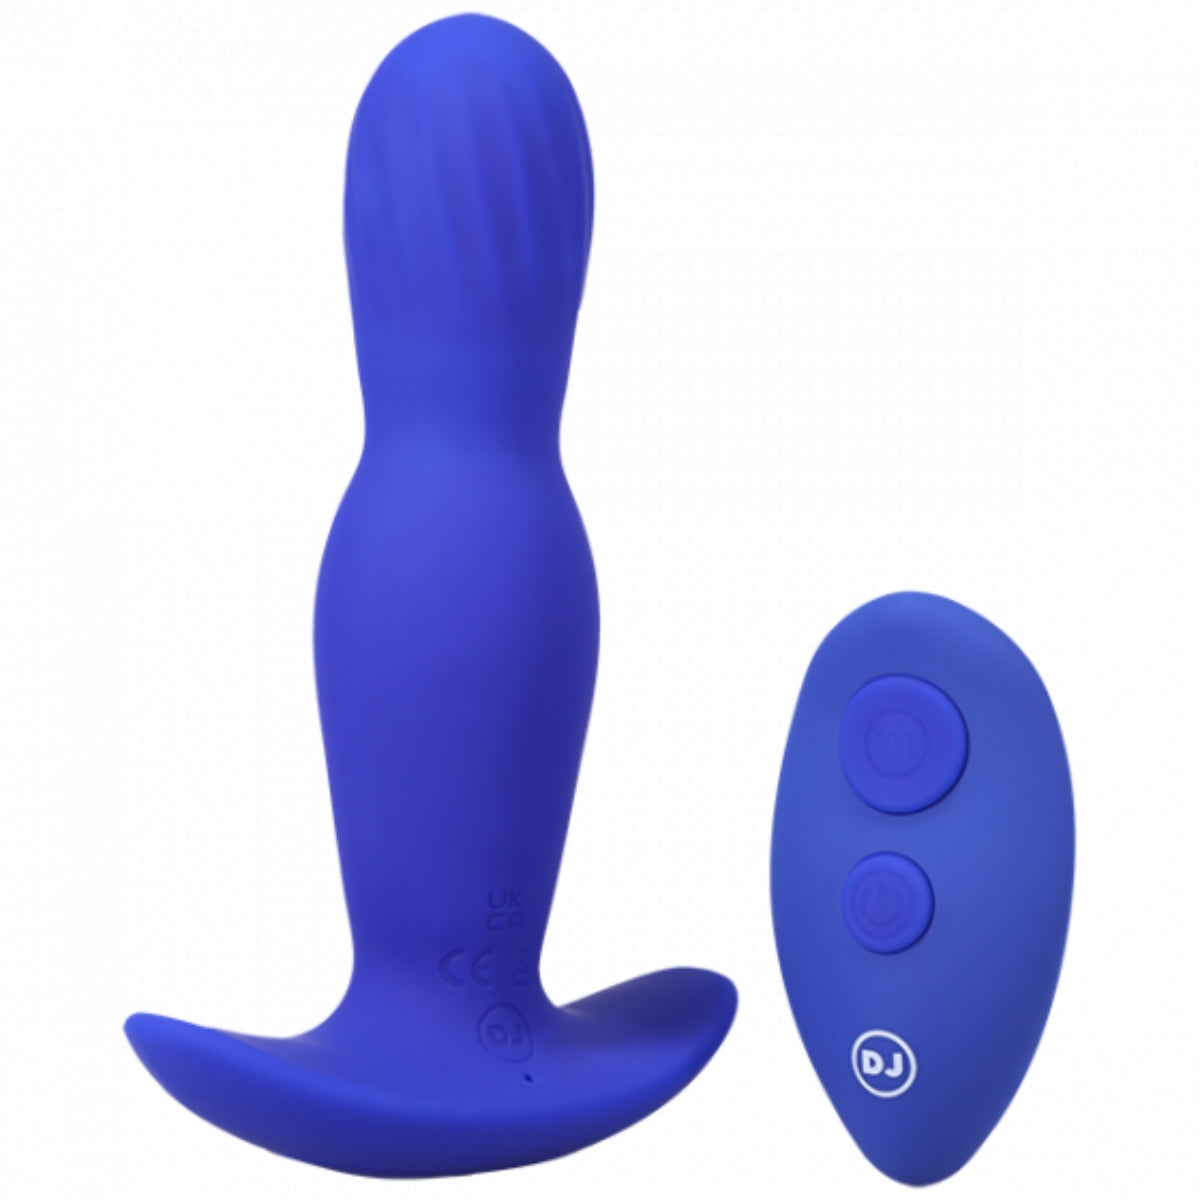 A-Play Expander Remote Control Silicone Butt Plug Blue 5.75 Inch